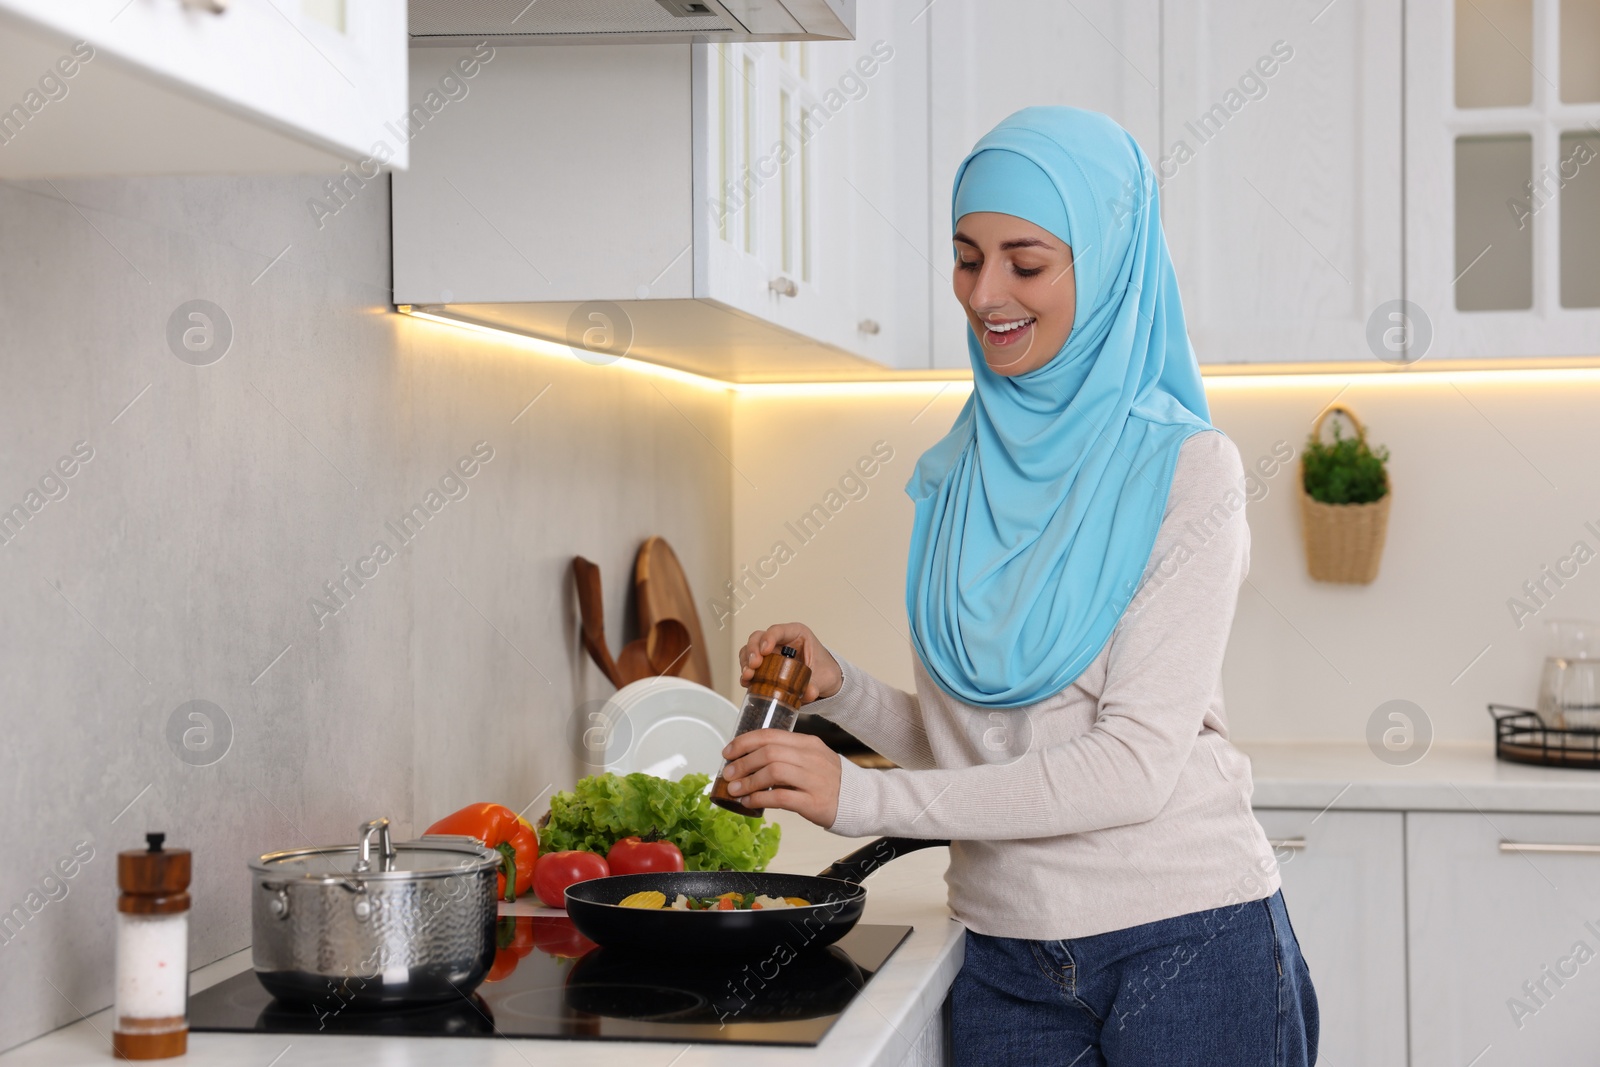 Photo of Muslim woman cooking dish in frying pan on cooktop indoors